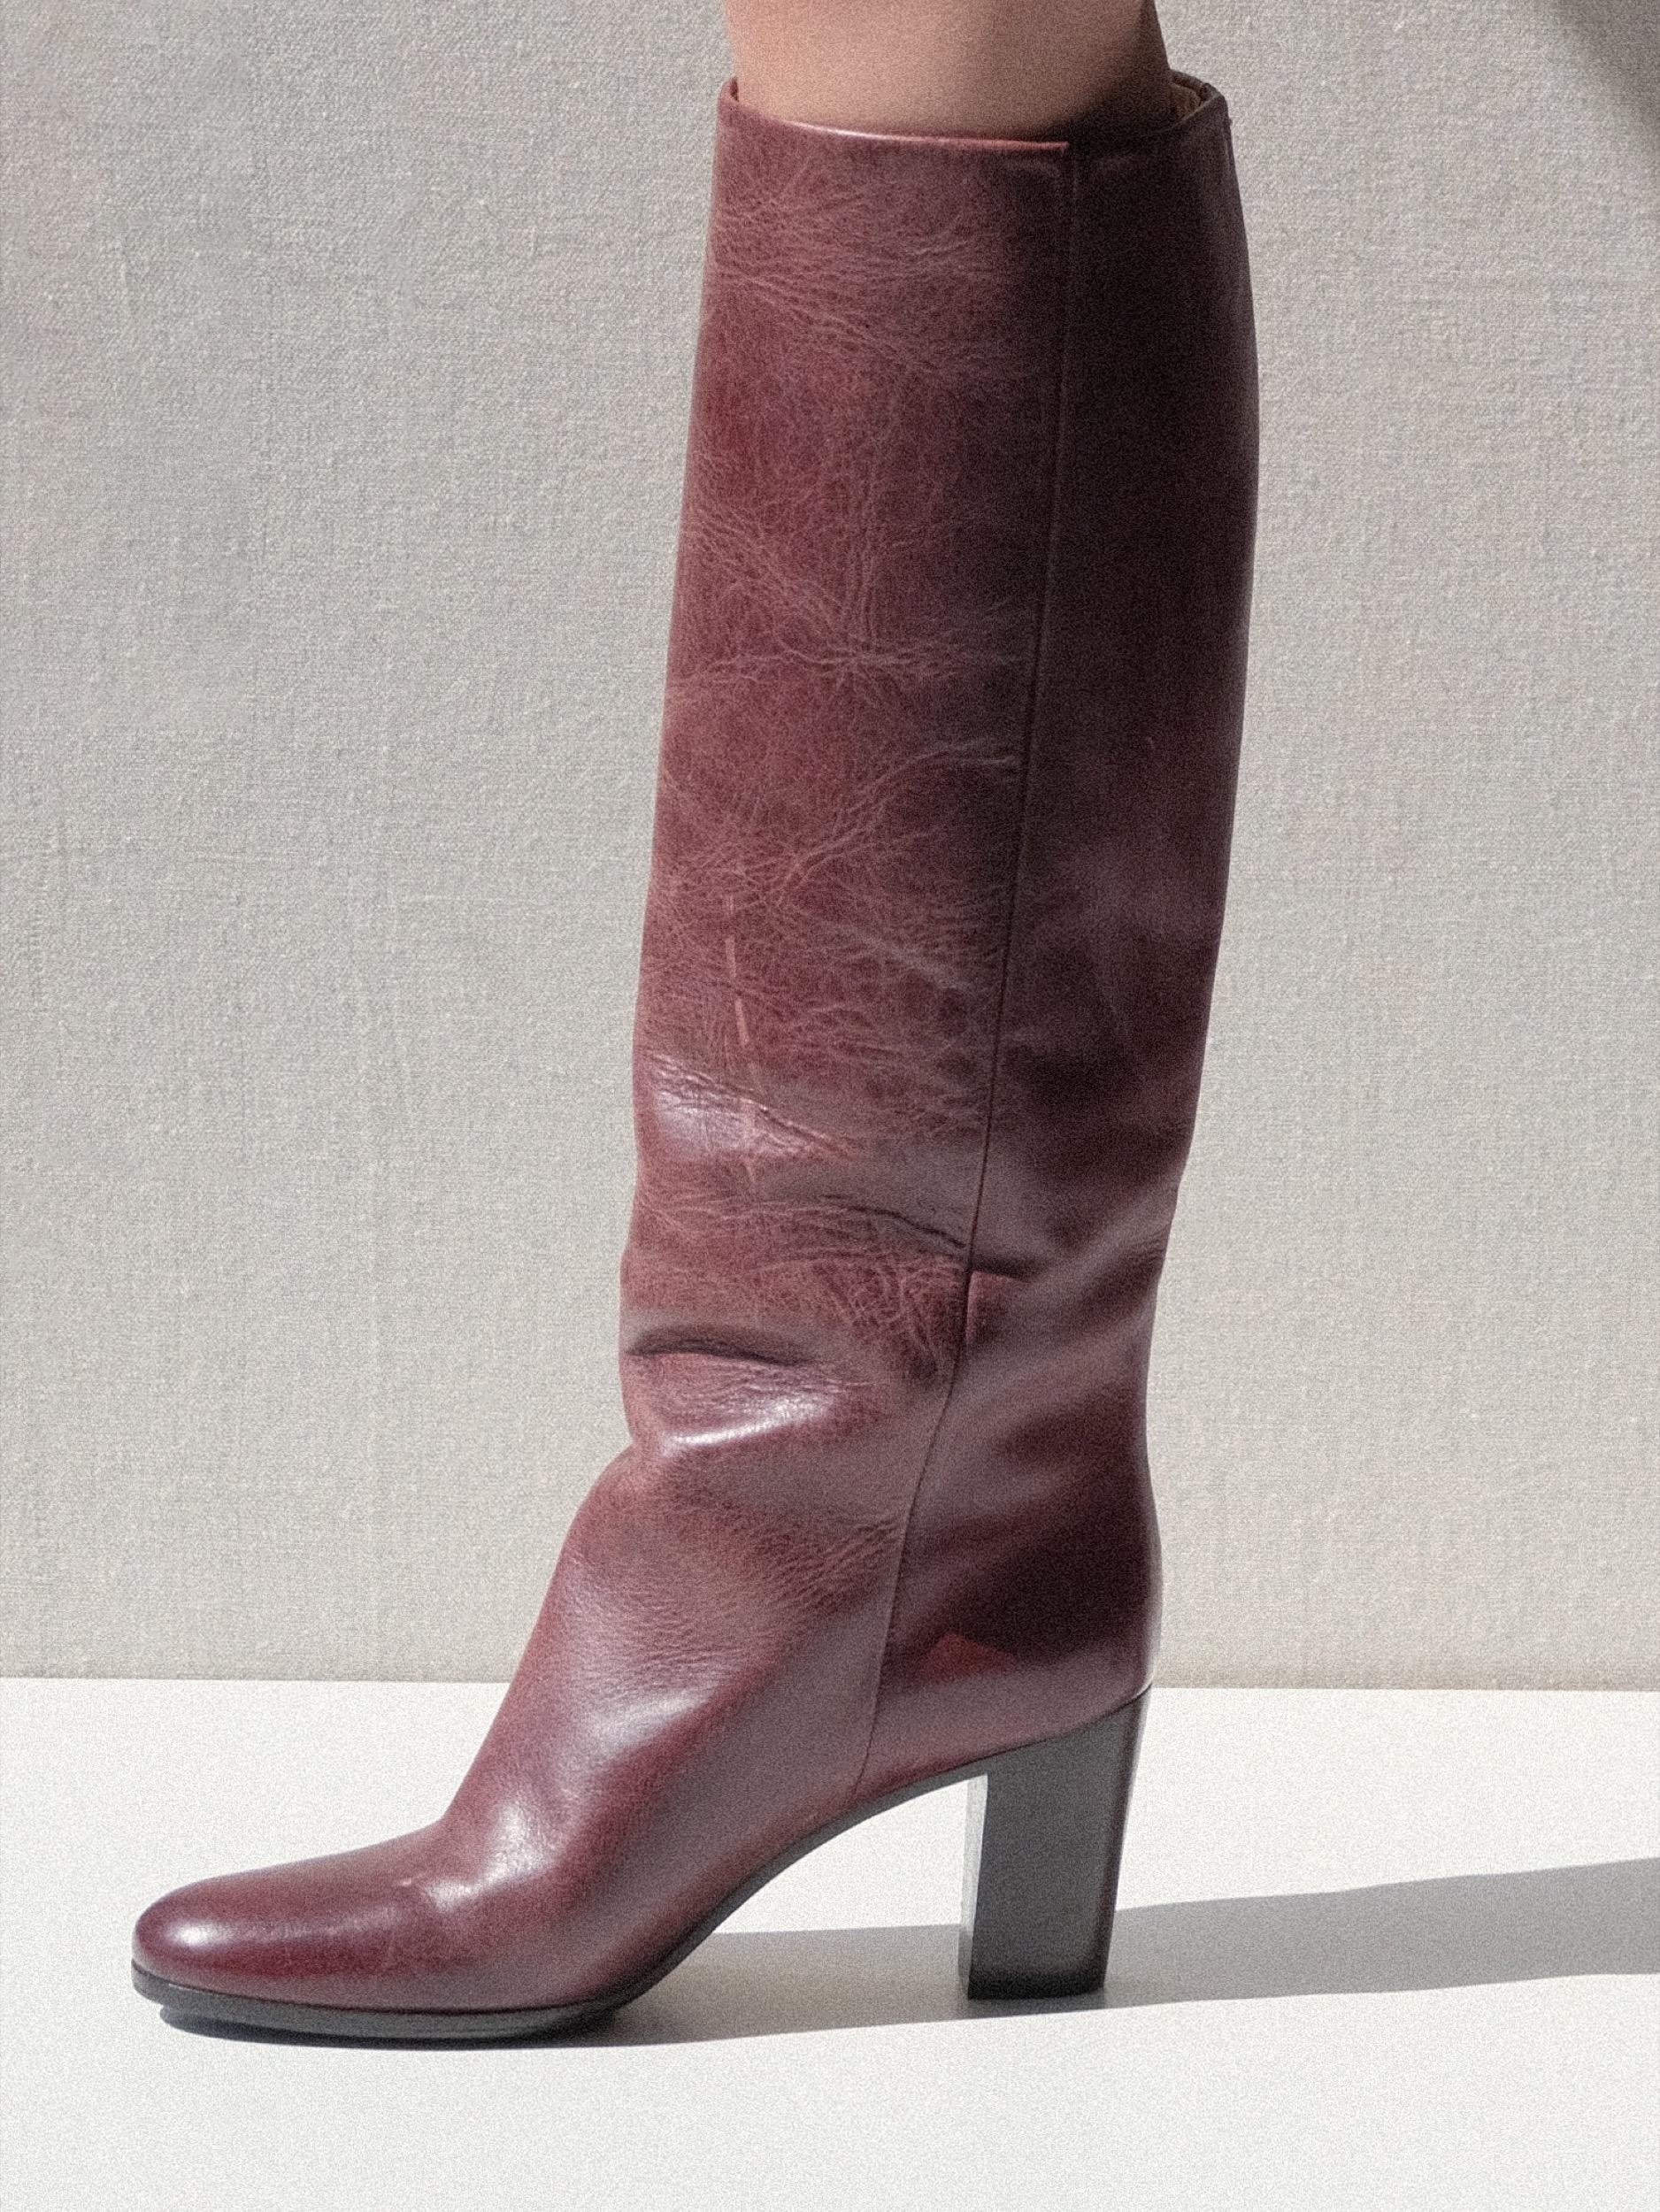 Martin Margiela Riding Boots Deep Red Size 37 Replica Line 22 For Sale 5